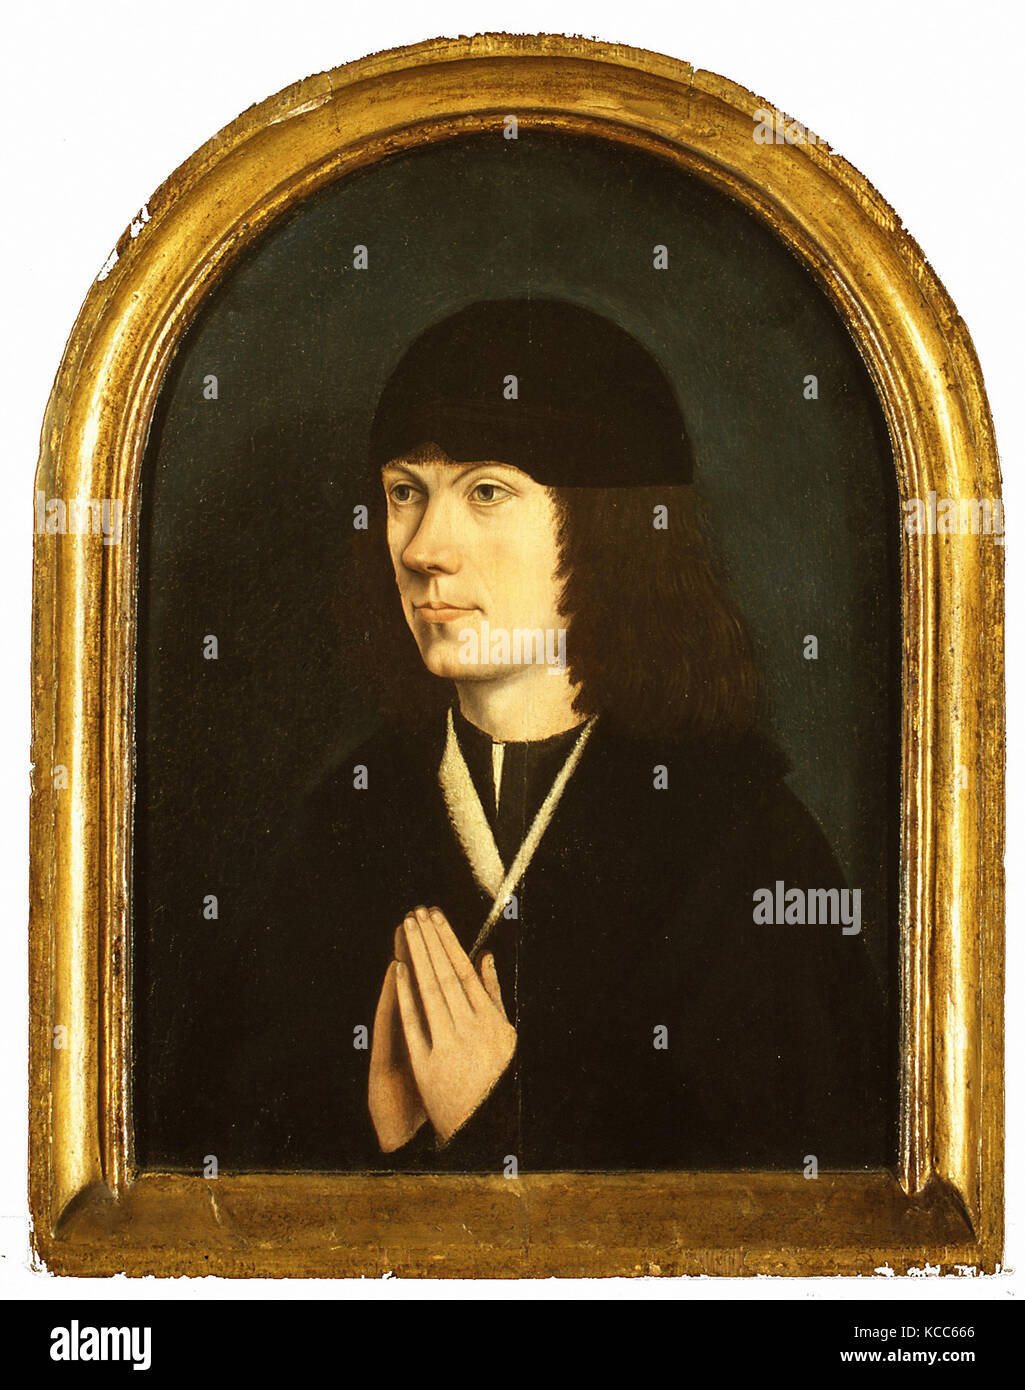 Portrait of a Young Man, Oil on wood, Overall, with arched top and engaged frame, 13 x 10 1/8 in. (33 x 25.7 cm); painted Stock Photo